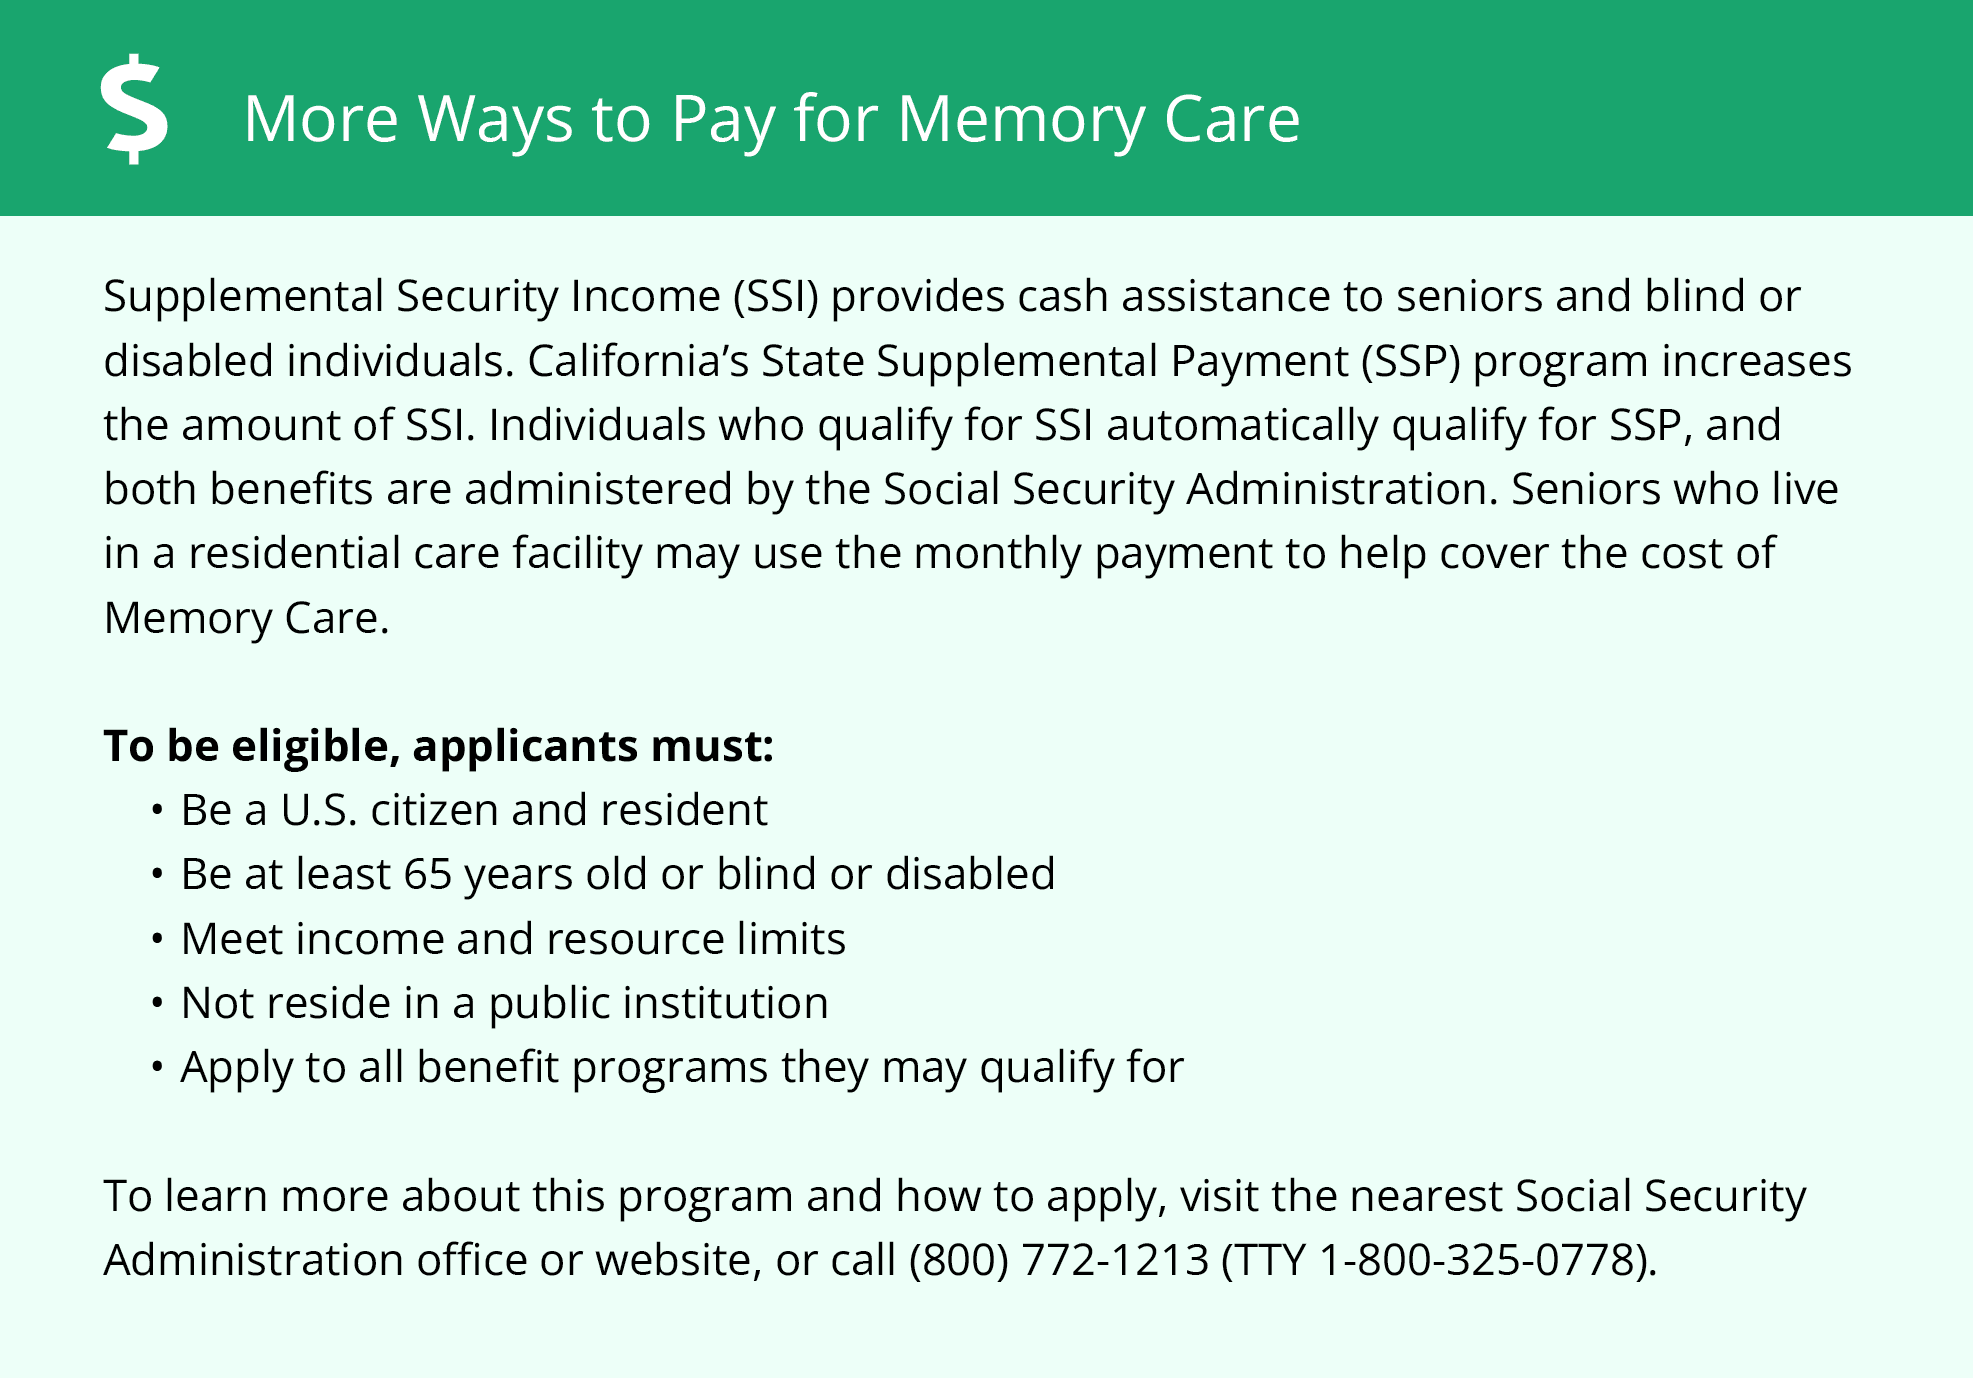 More ways to pay for memory care in California